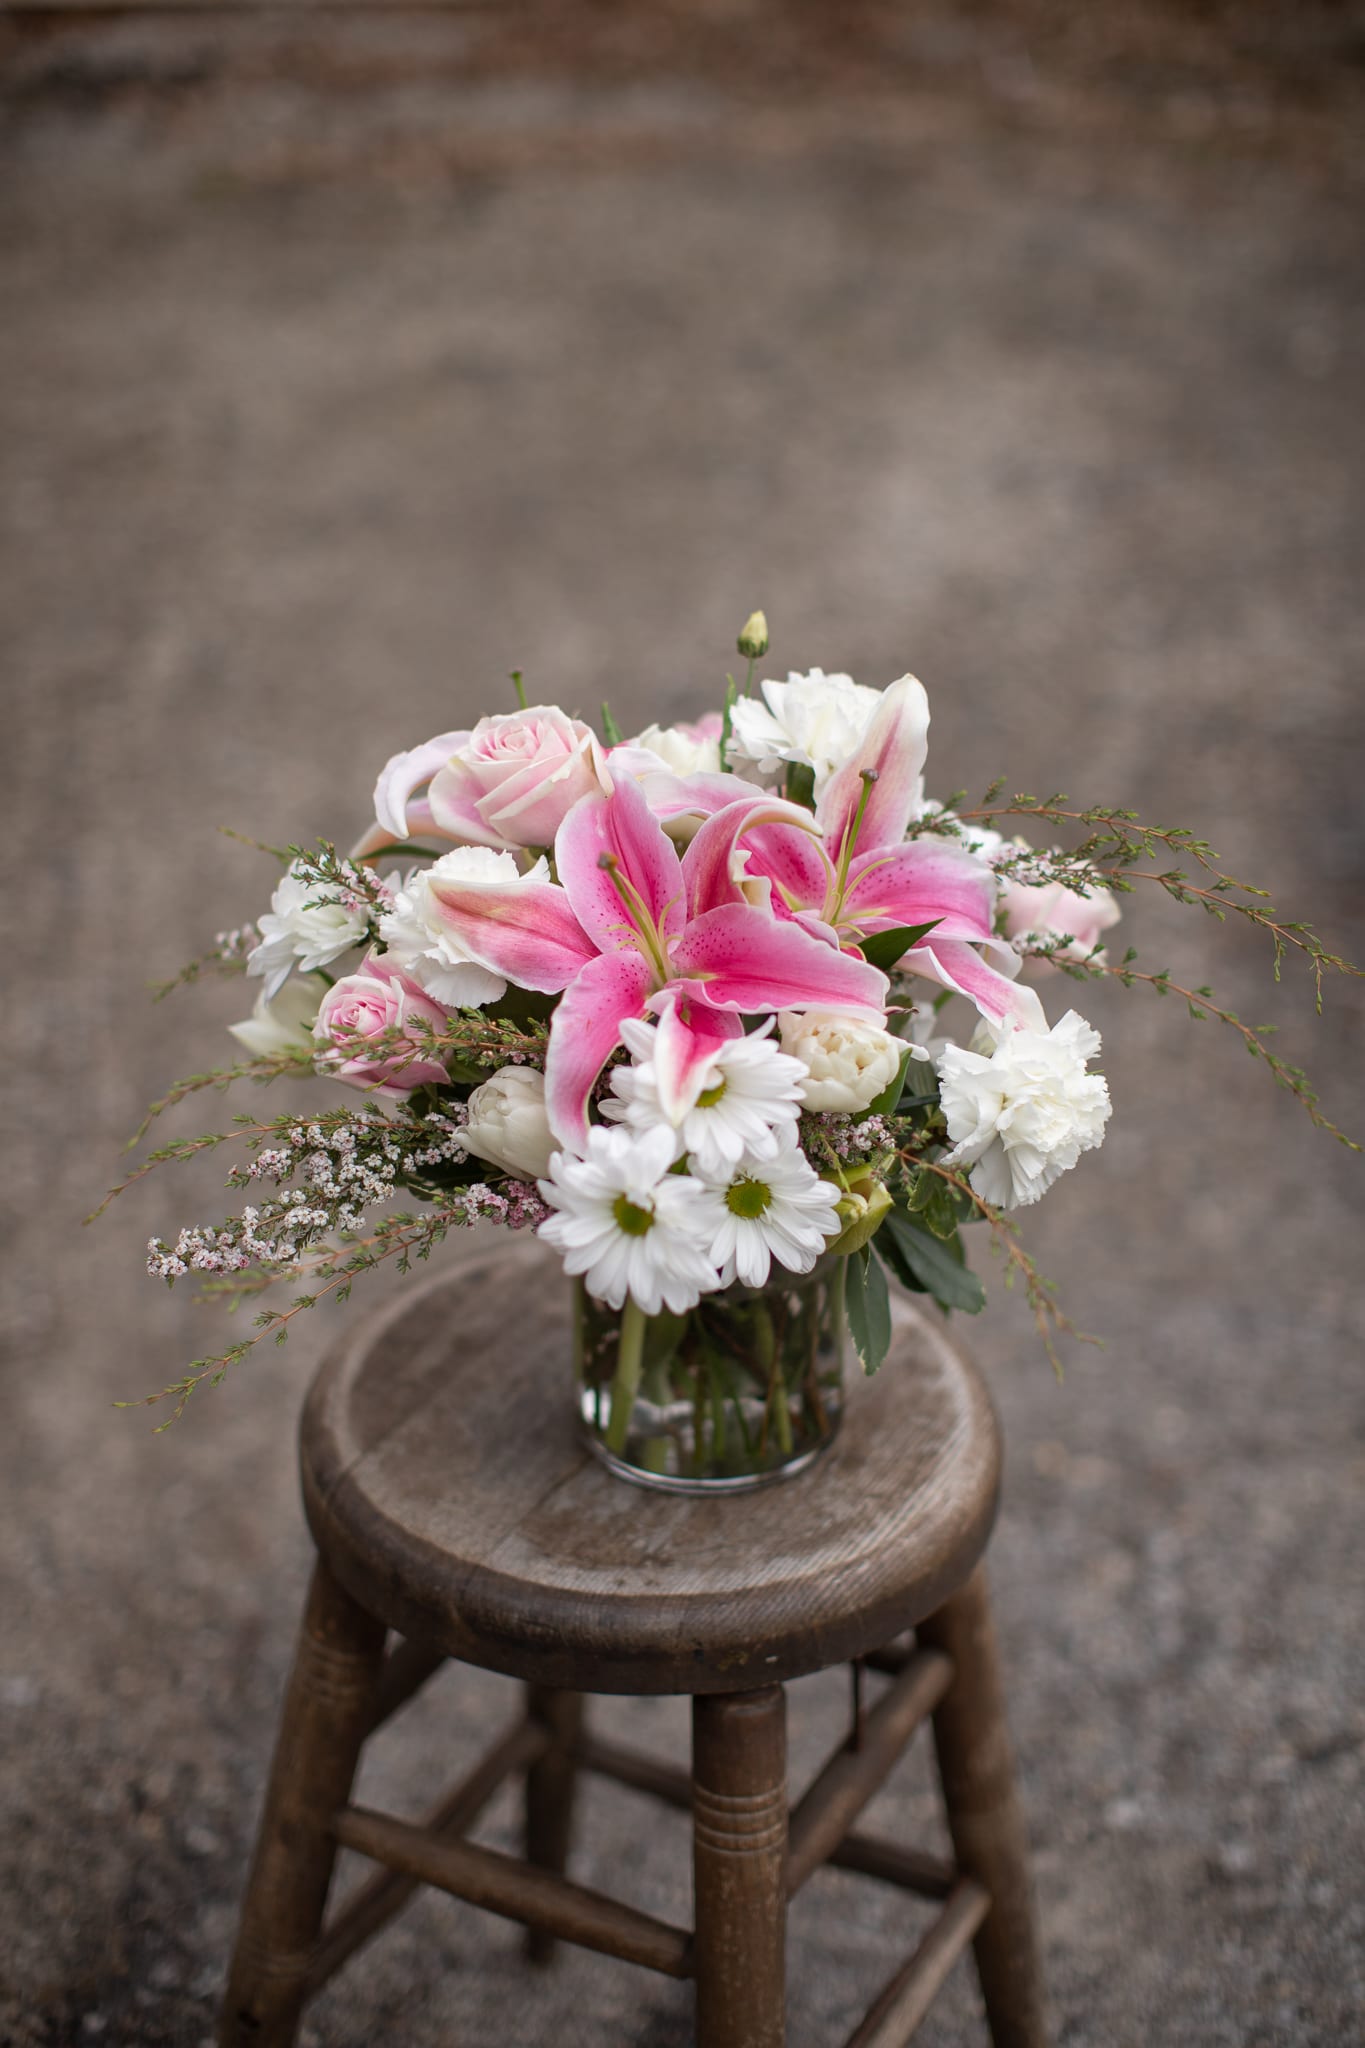 Pretty in Pink Bouquet - A beautiful pink bouquet perfect for any occasion. A pink lily is the focal point of this cylinder or cube vase arrangement. Other flowers surrounding it may vary due to seasonality. Whites and pinks will surround the focal flower. This arrangement is perfect to send to welcome a new baby girl or just a little something special for those friends who are passionate about the color pink.